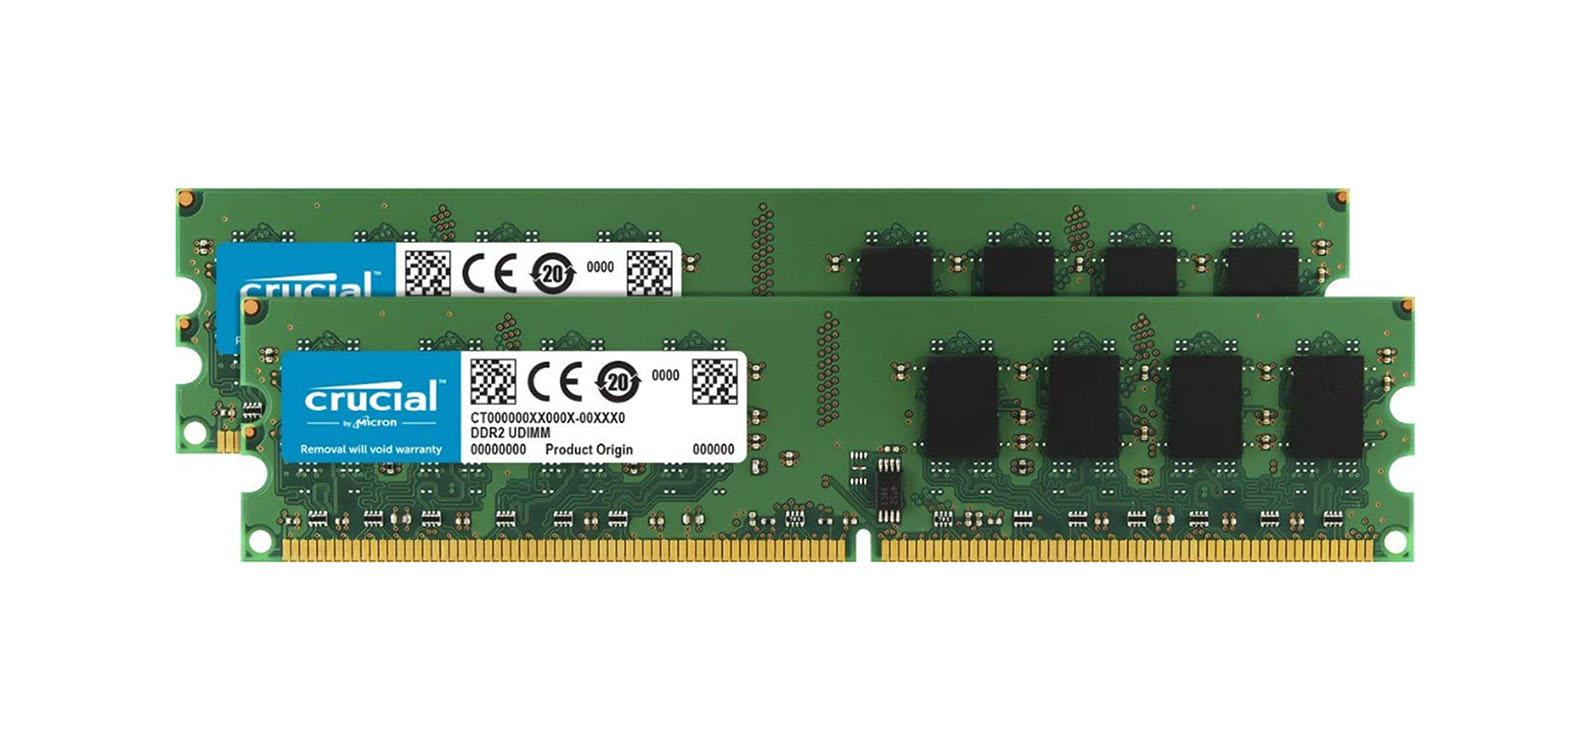 Crucial CT682683 8GB Kit (2 x 4GB) DDR2-667MHz PC2-5300 ECC Registered CL5 240-Pin DIMM Dual Rank Memory Upgrade for HP - Compaq ProLiant DL385 G2